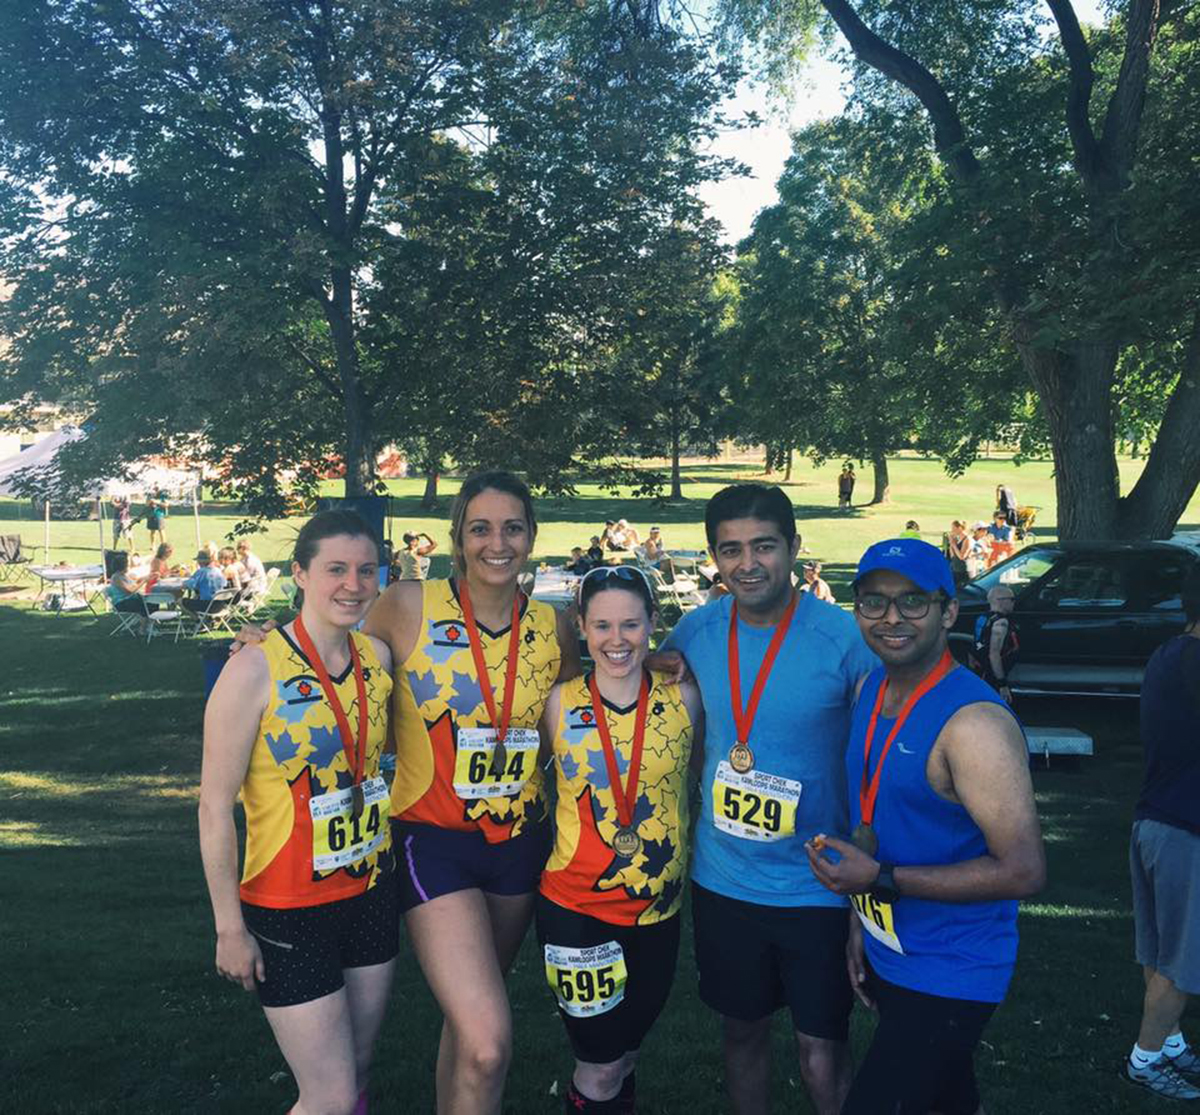 From left to right, myself, Kirsten, Kaitlyn, Nand and Abhishek. The five of us ran the Kamloops Half-Marathon together on July 24. It was a beautiful day for a race!